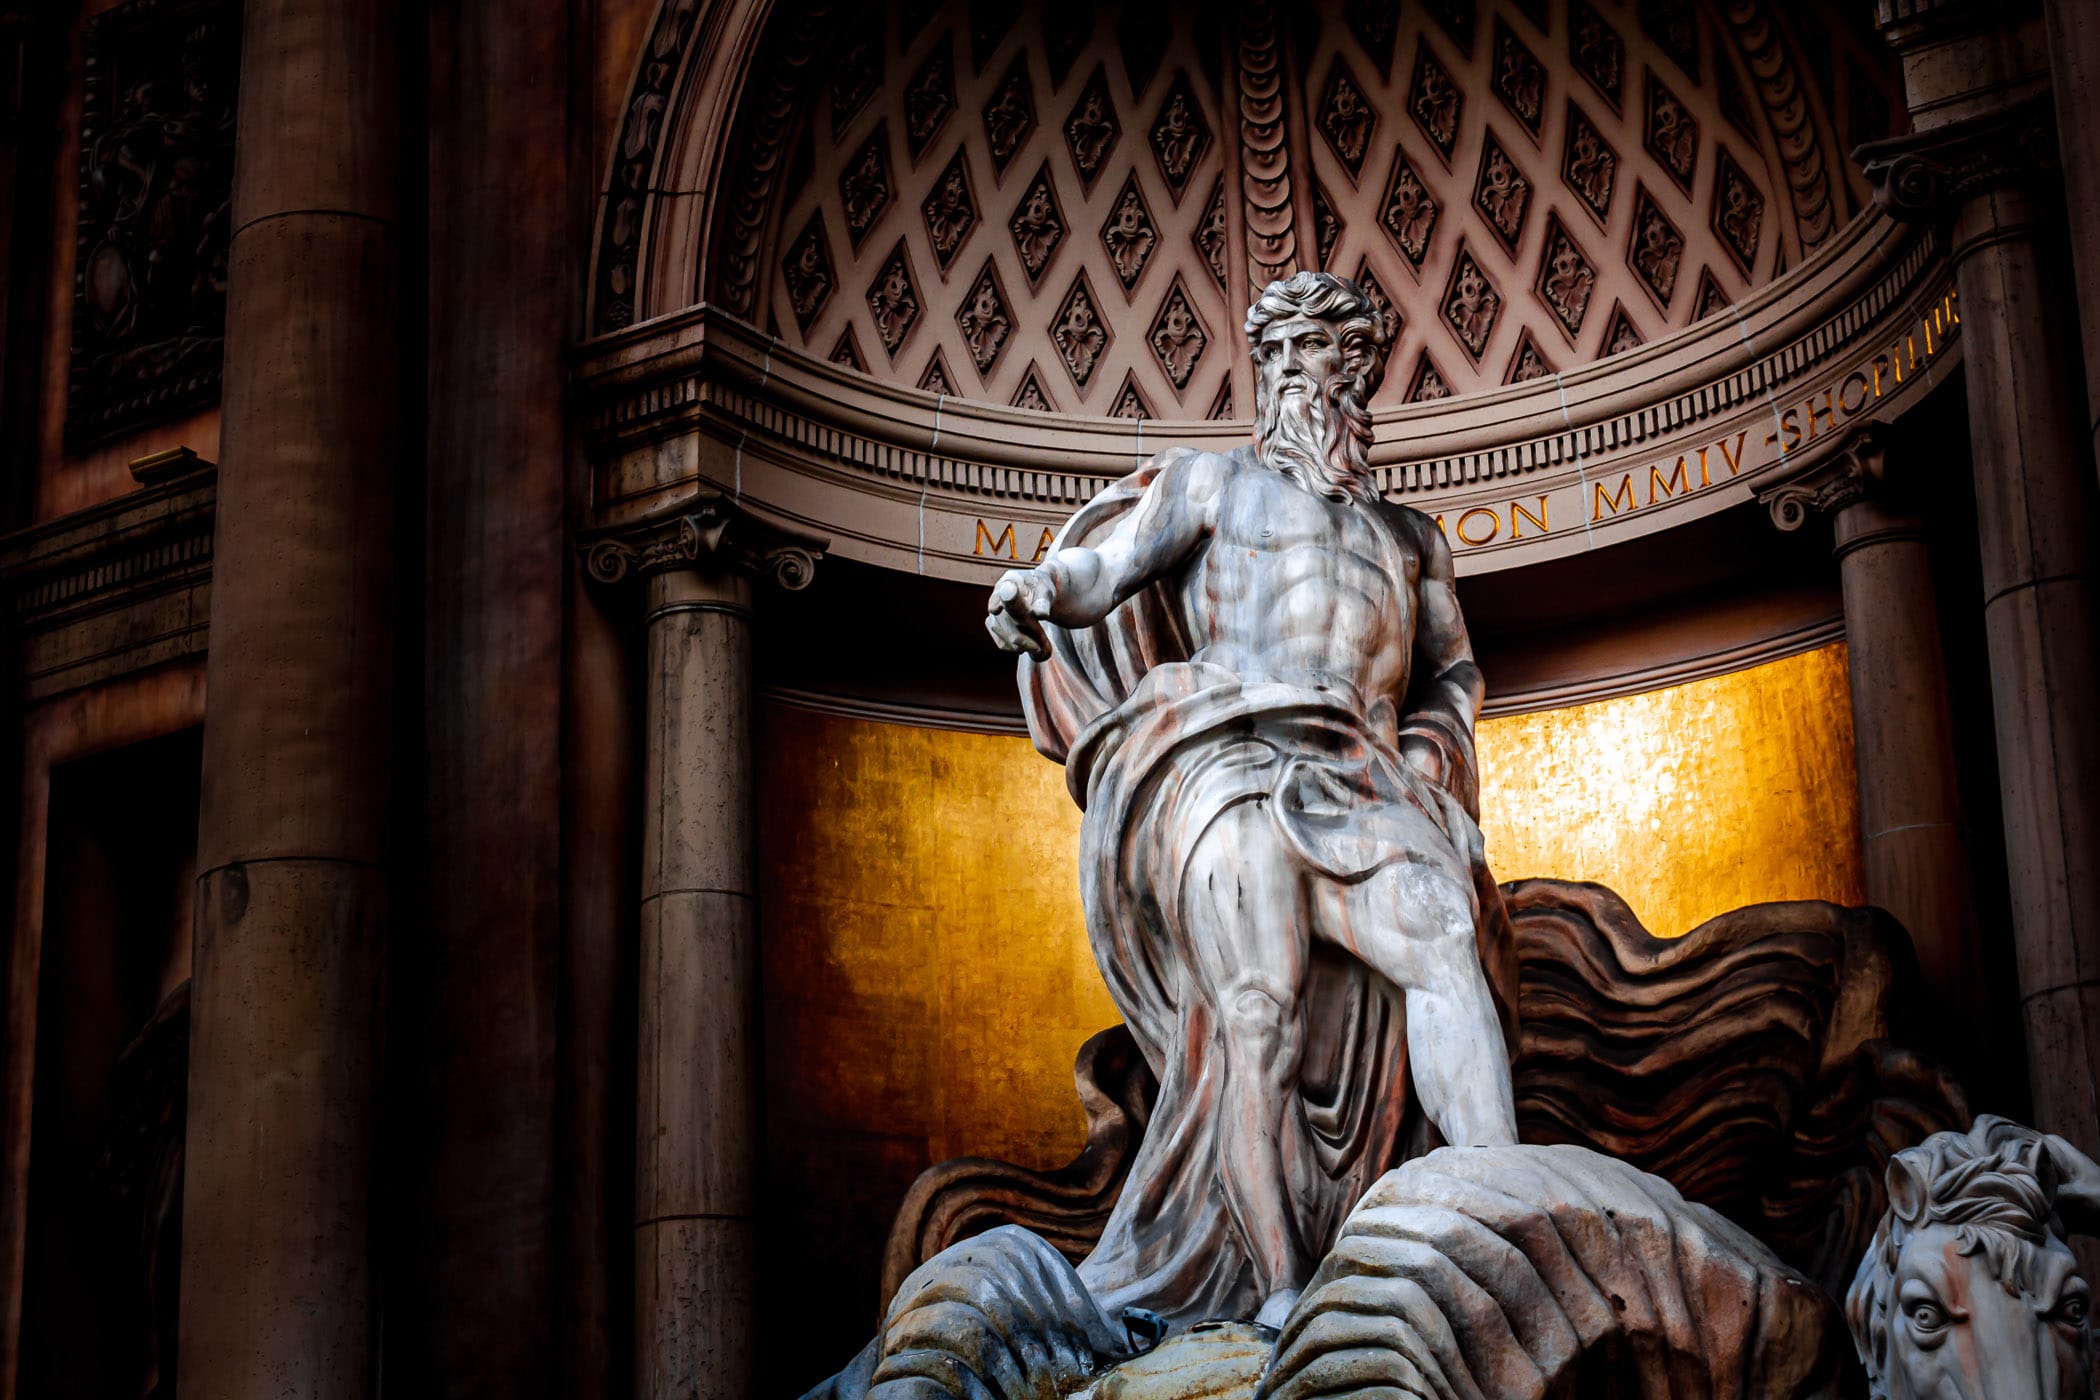 A statue of the Roman god of the sea, Neptune, known as Poseidon to the Greeks, stands in a replica of Rome's Trevi Fountain outside of the Forum Shops at Caesars Palace, Las Vegas.